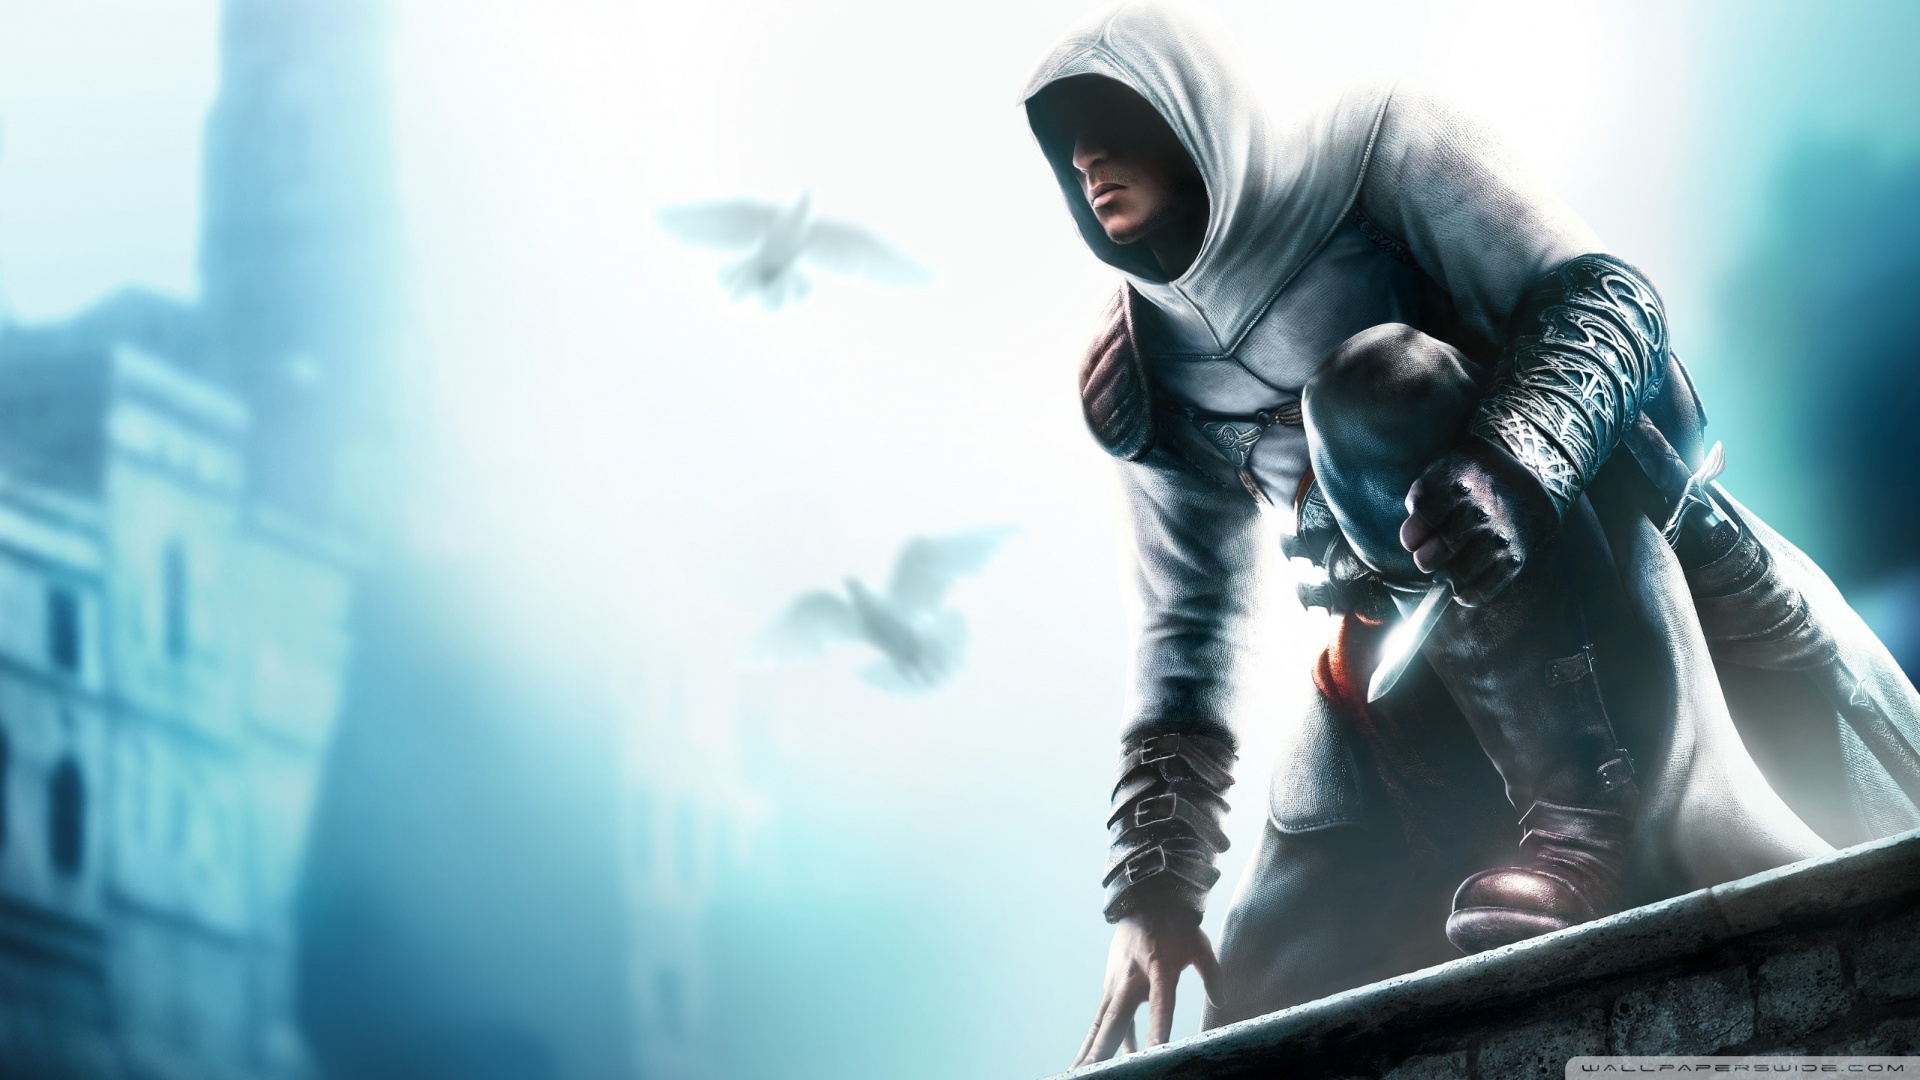 Assassin's Creed: Bloodlines (Video Game 2009) - IMDb